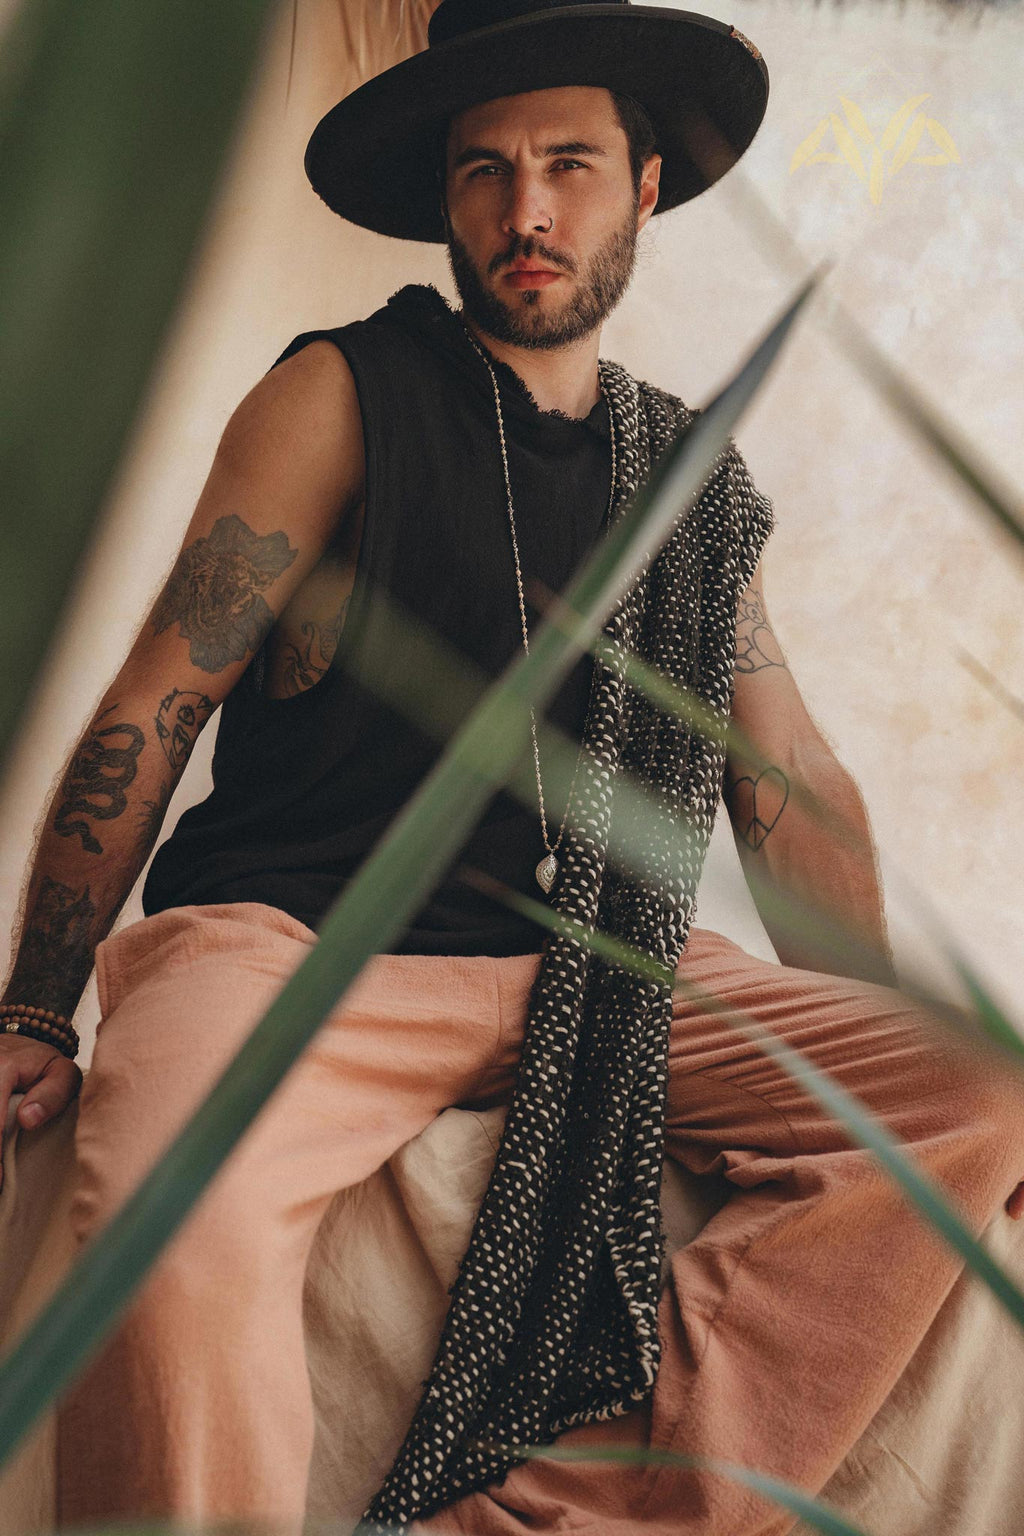 Black Handwoven Thick Cotton Sleeveless Hoody Tank Top for Man by AYA Sacred Wear